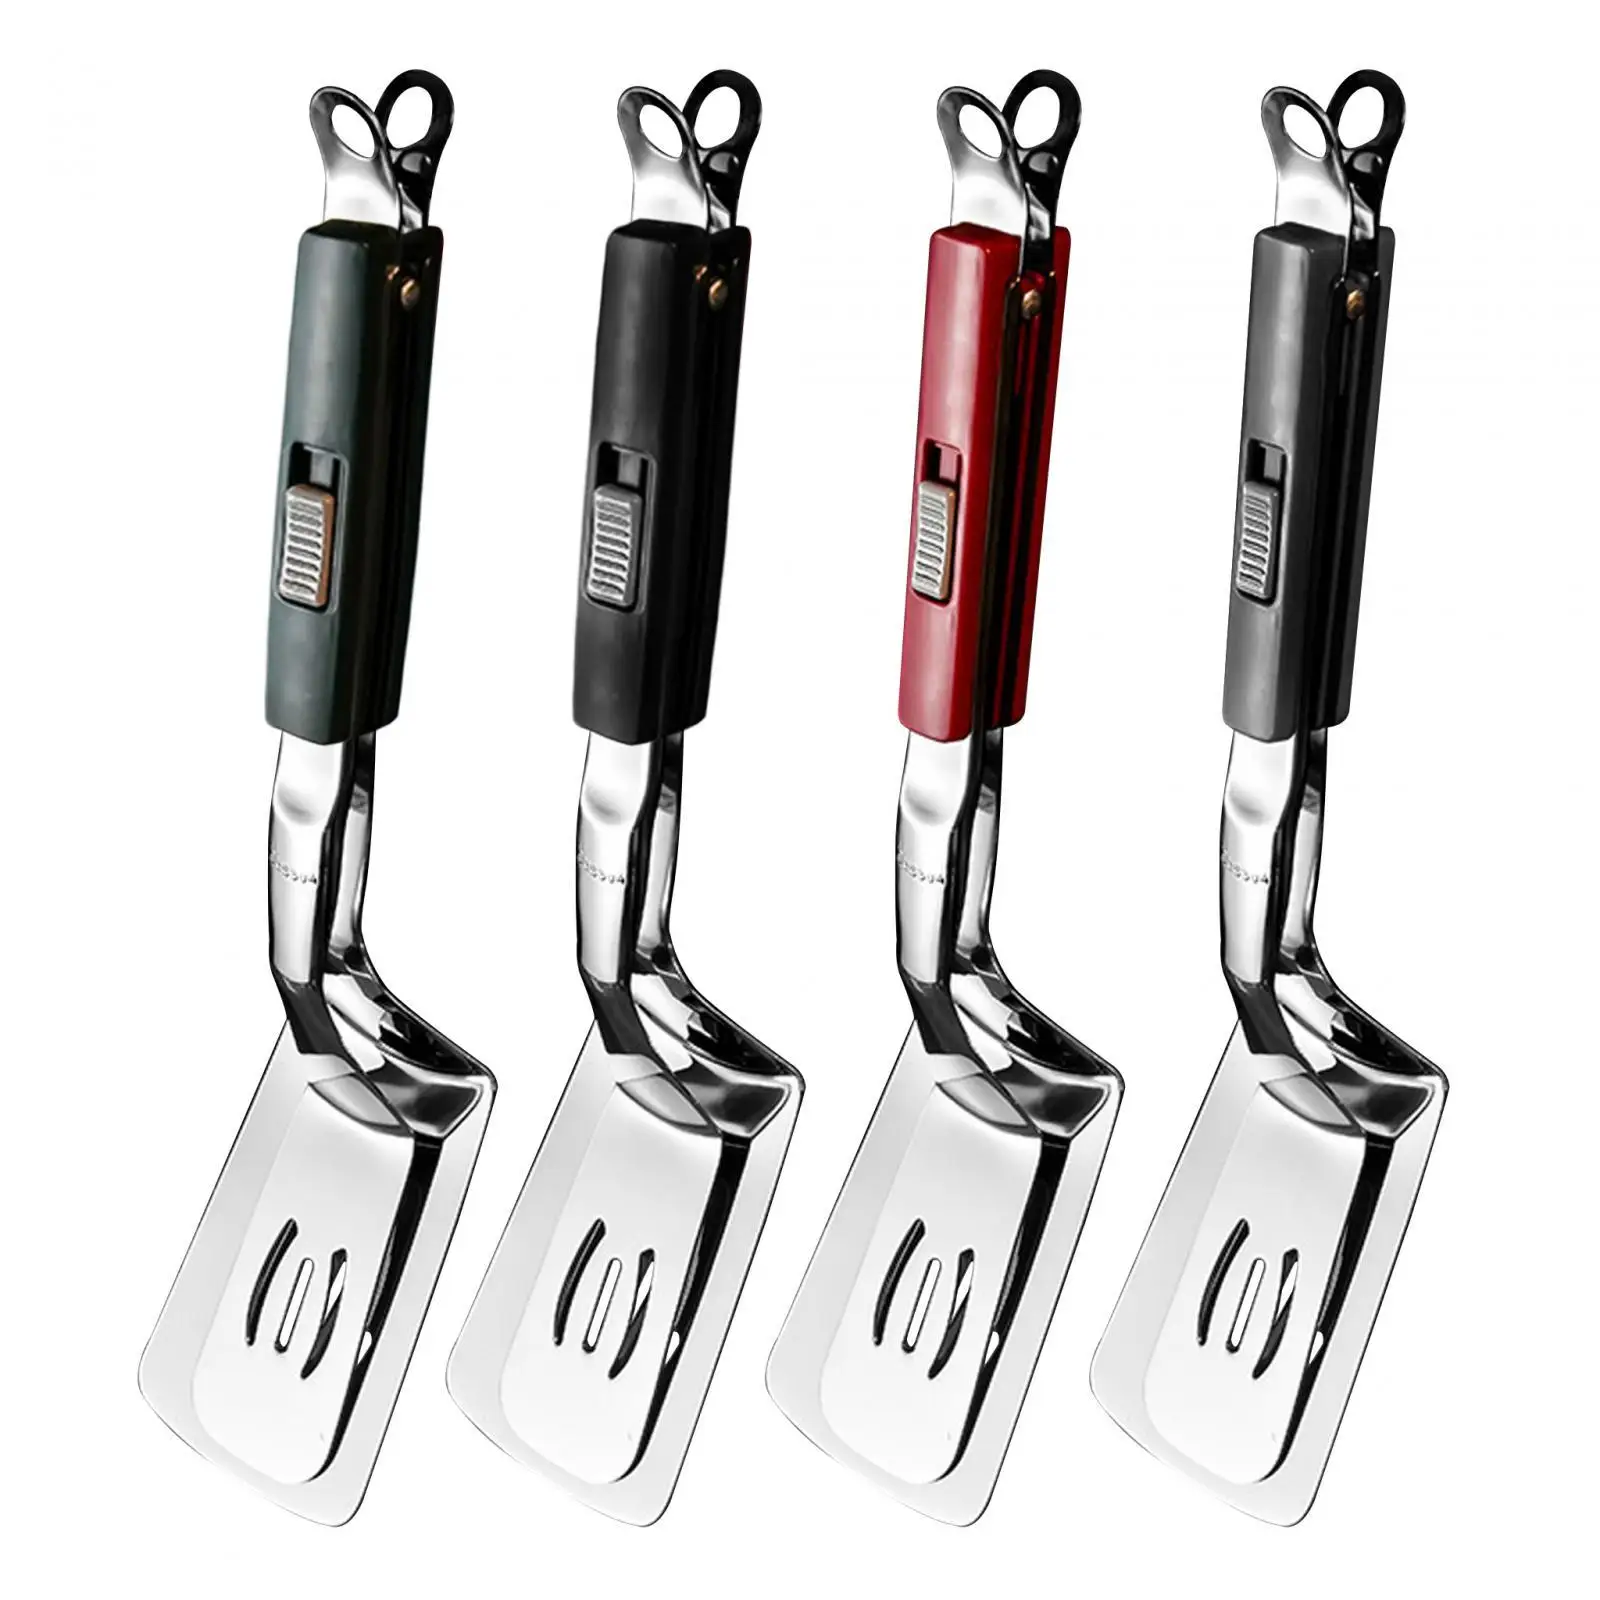 Stainless Steel Spatula Tongs Steak Clamps for Beef Steak Meat Pancakes